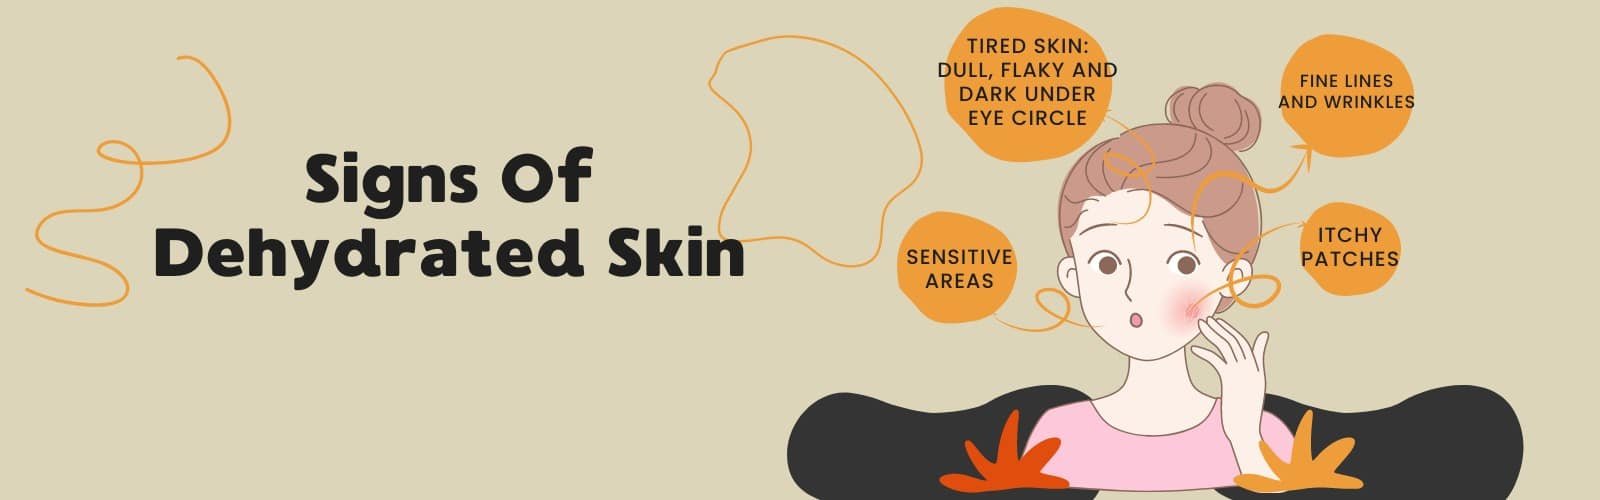 Signs of Dehydrated Skin